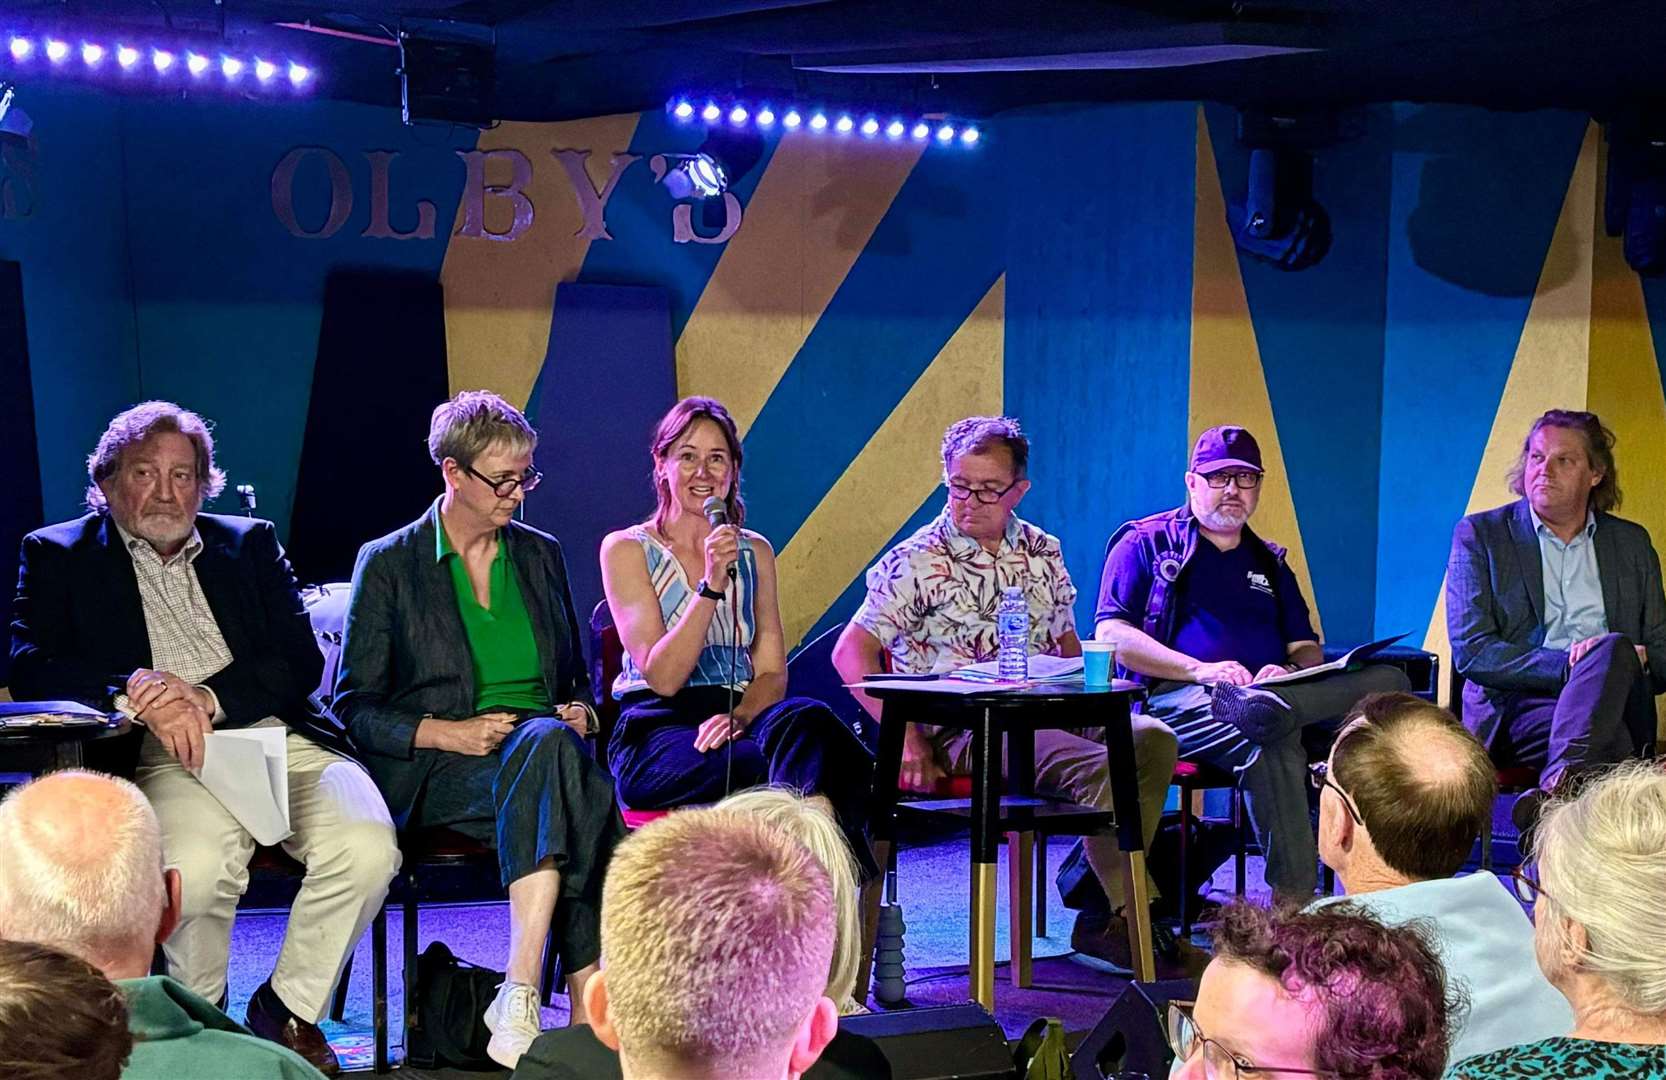 General election hustings for East Thanet held at Olby's in Margate. From left: Grahame Birchall (Ind), Polly Billington (Lab), chairwoman Jo Verney, Steve Roberts (Green), Paul Holton (Ind) and Paul Webb (Reform). Picture: Rebecca Smith